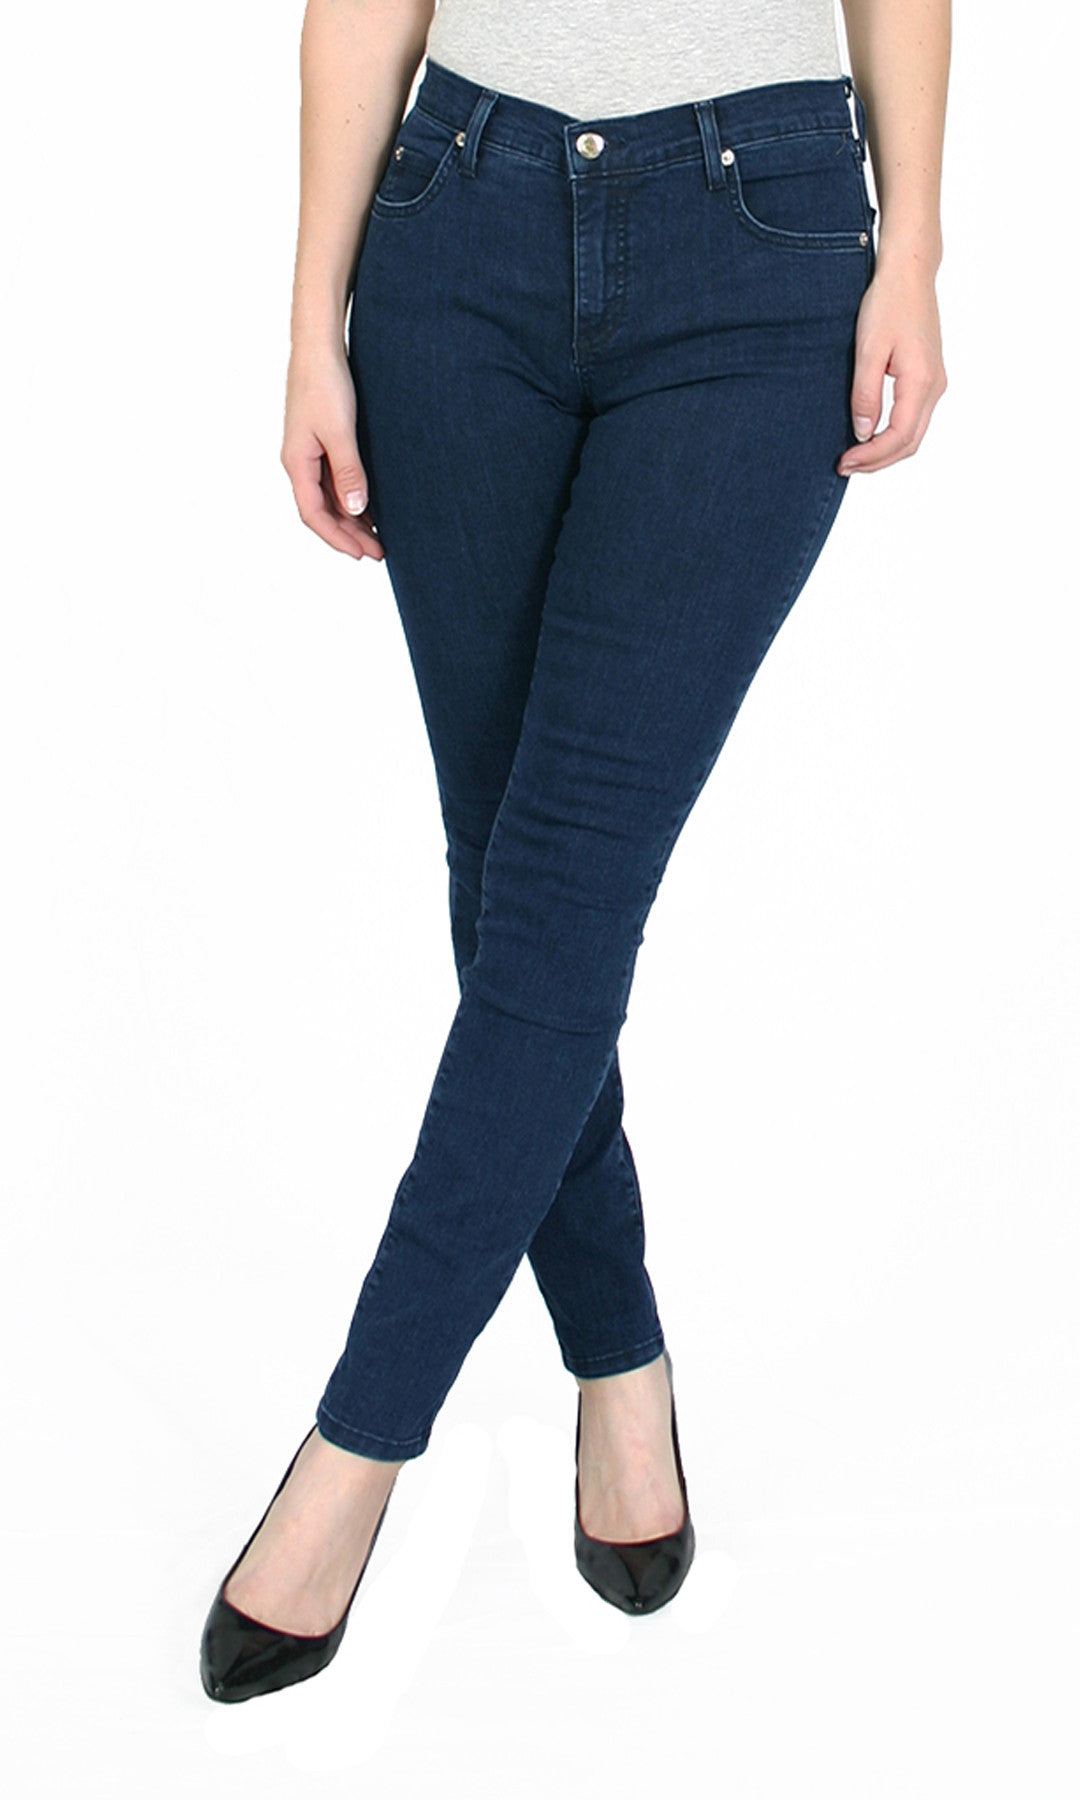 Buy Girls Jeggings -Blue Online at Best Price | Mothercare